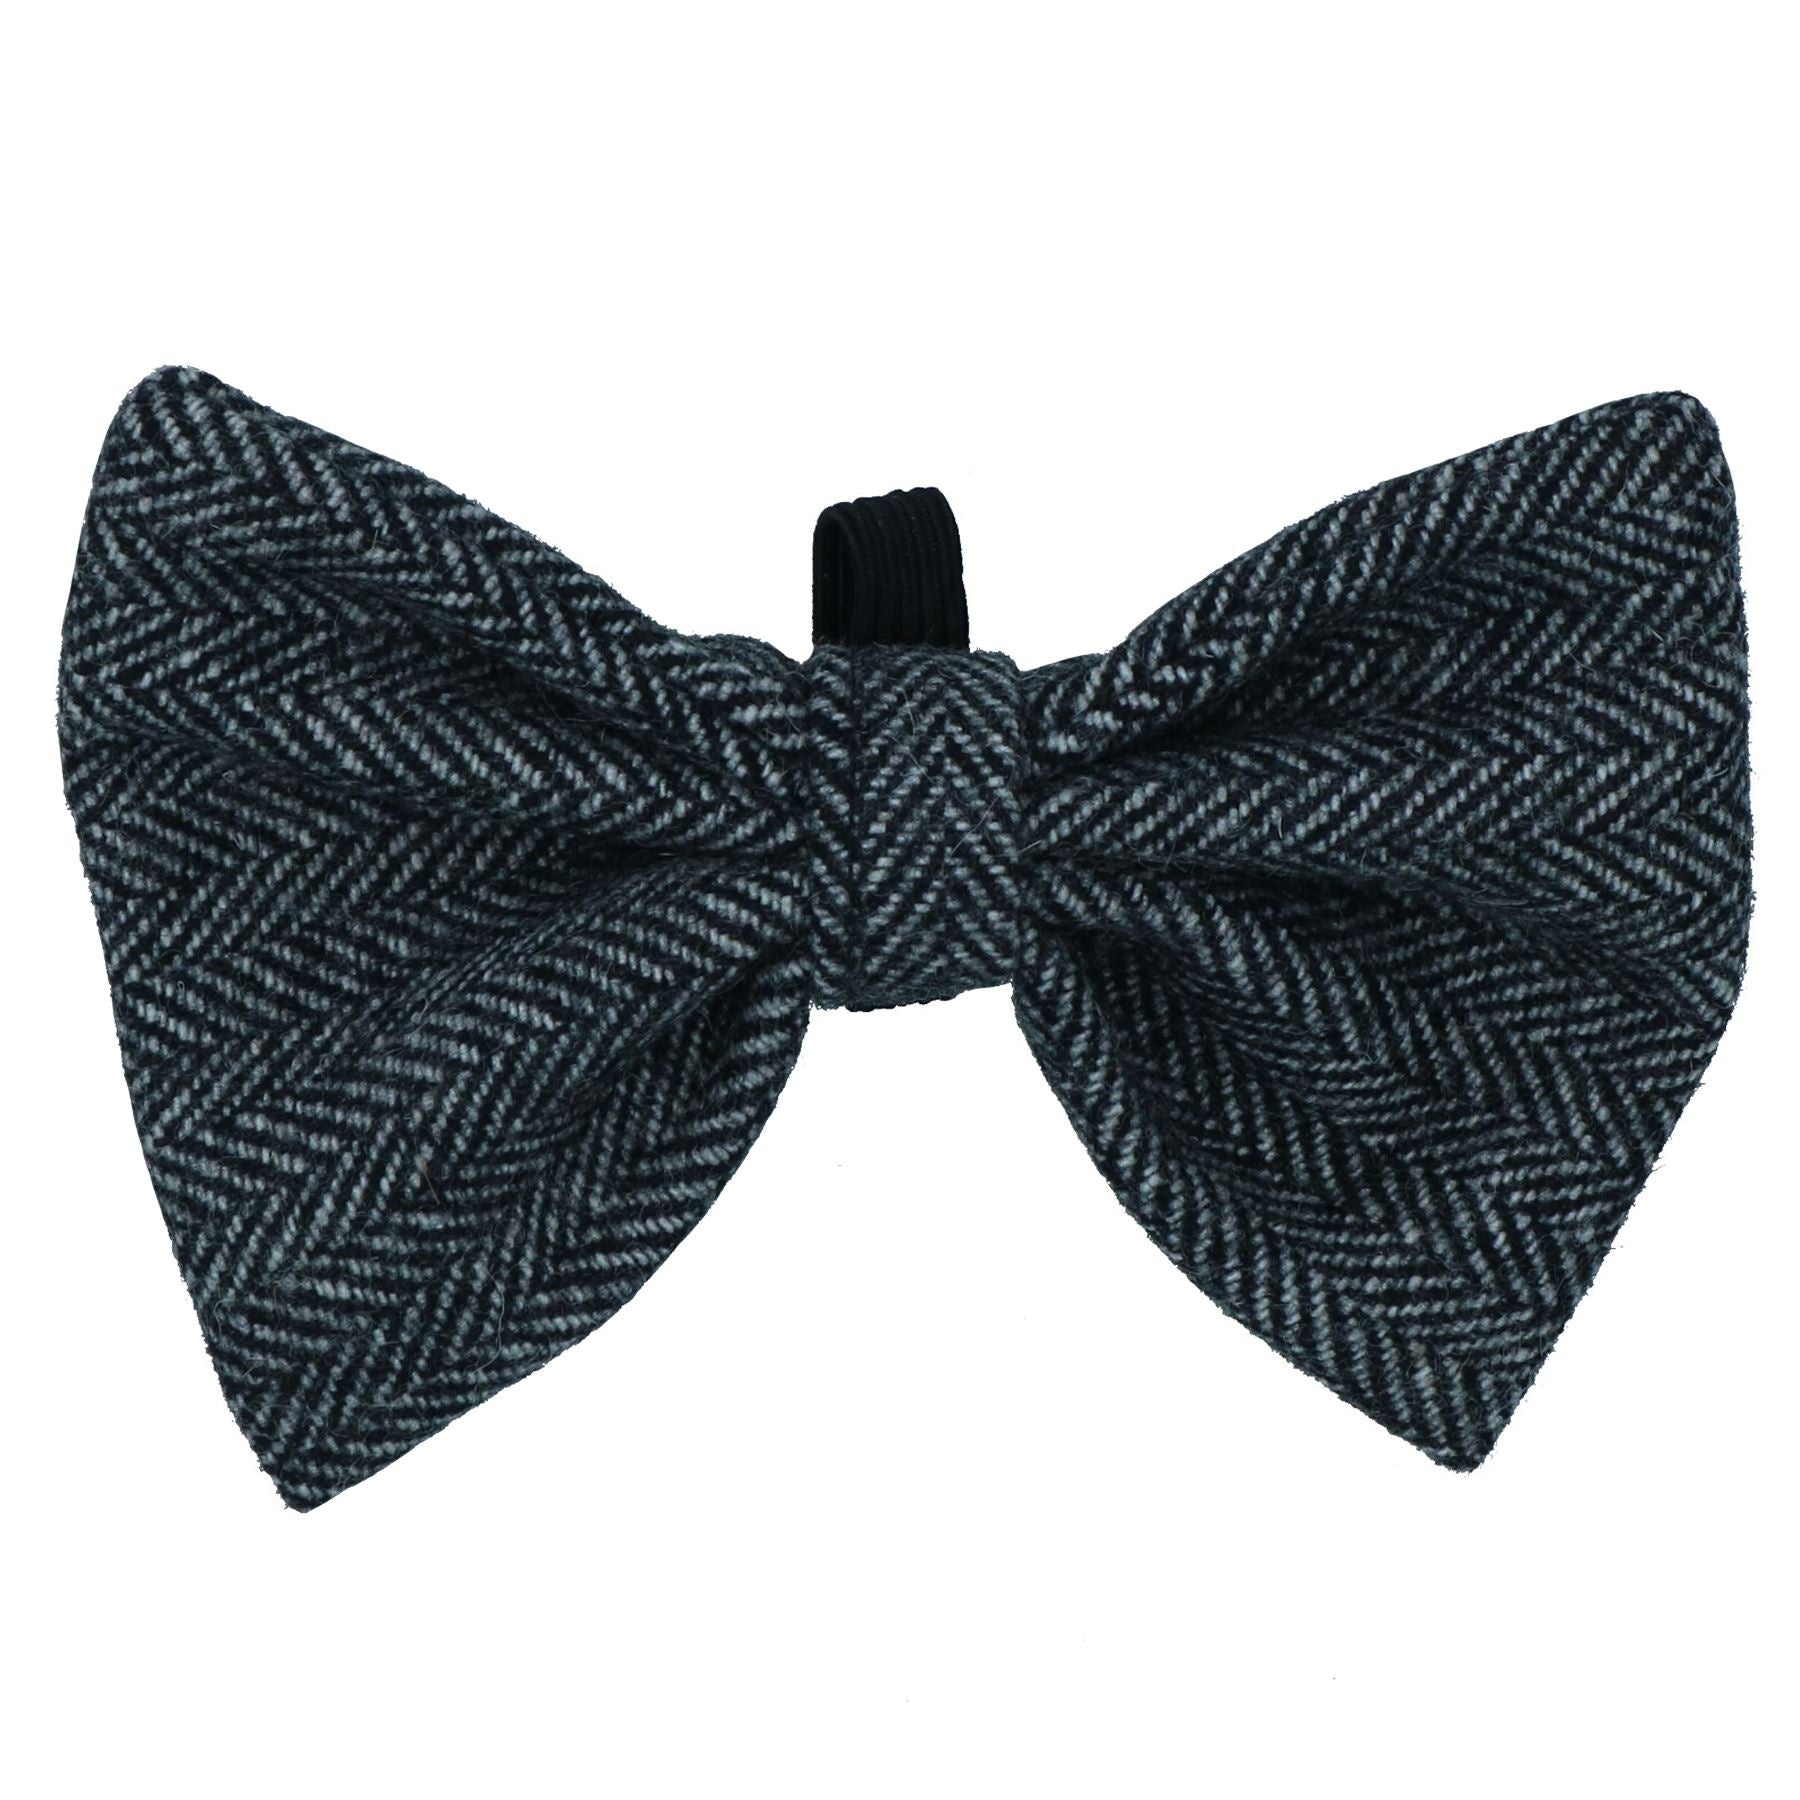 One Size Stylish Grey Tweed Dog Bow Tie For Fashionable Dogs With Collar Loop